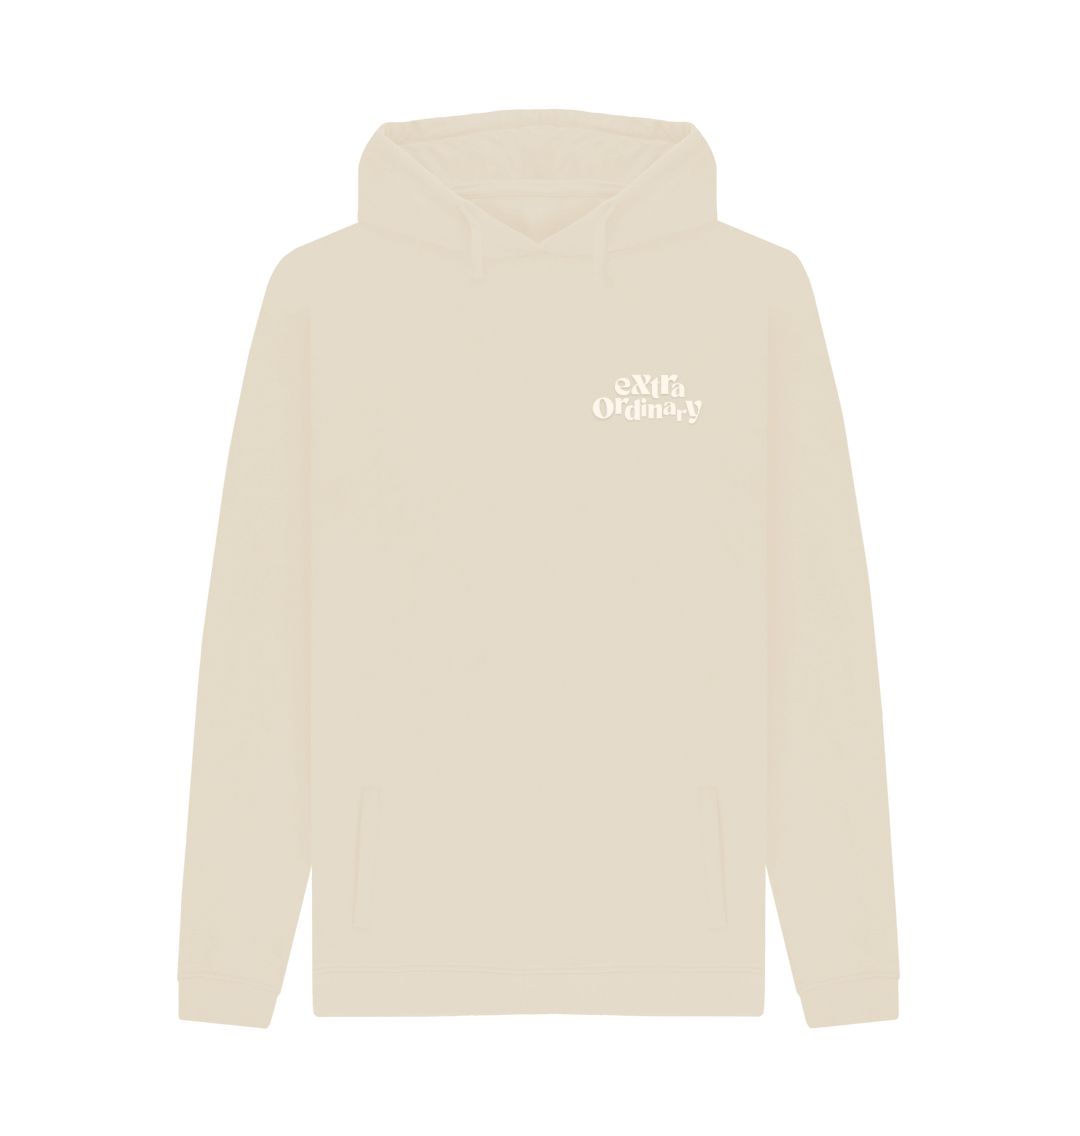 Oat EXTRA ORDINARY TITLE Hoodie